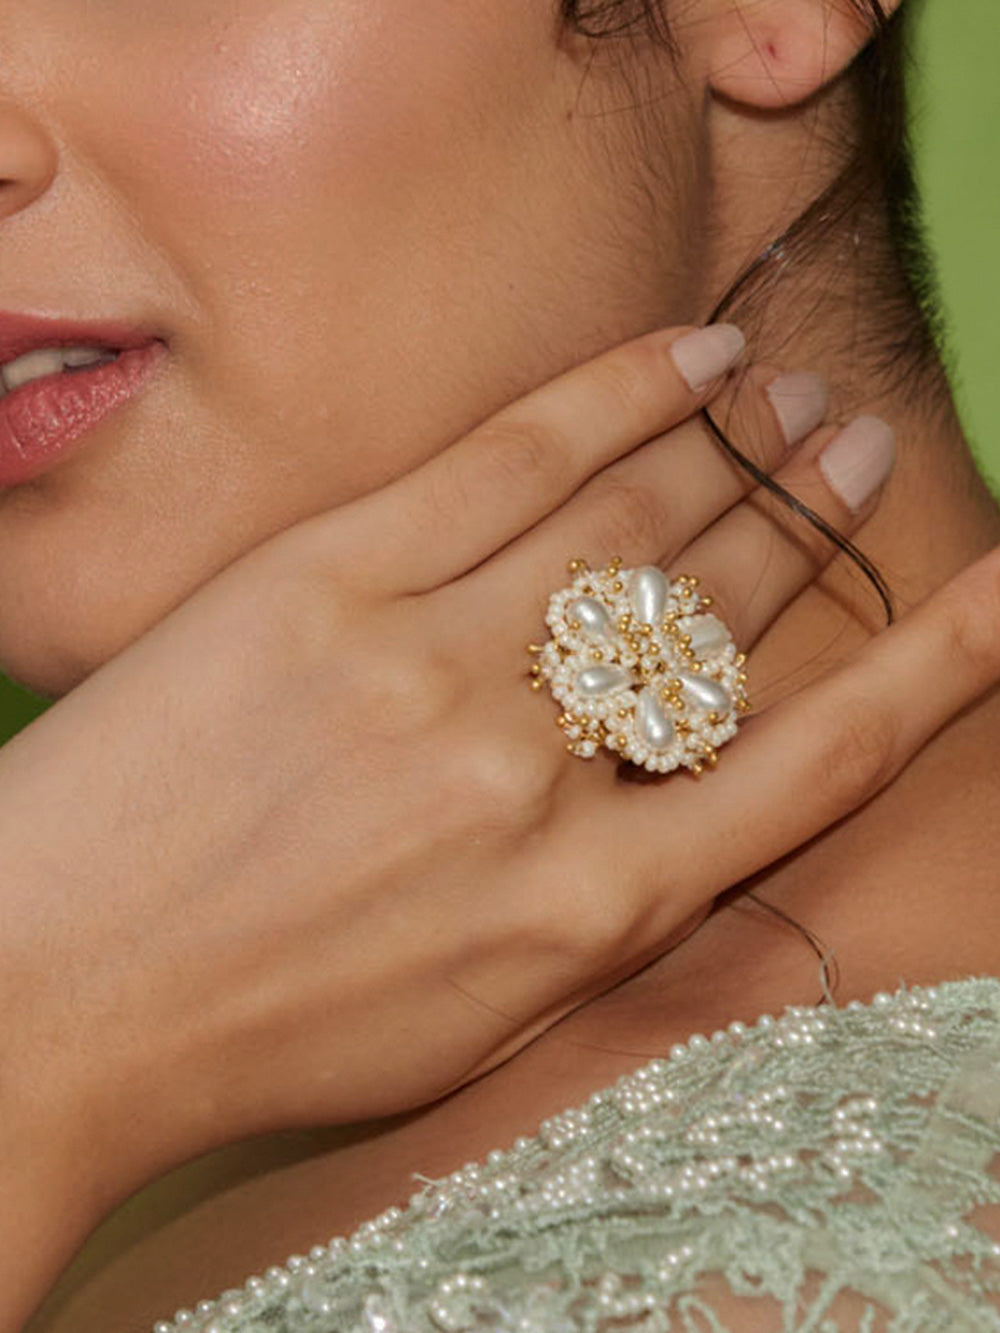 Amama,Statement White Pearls Flower Shaped Ring